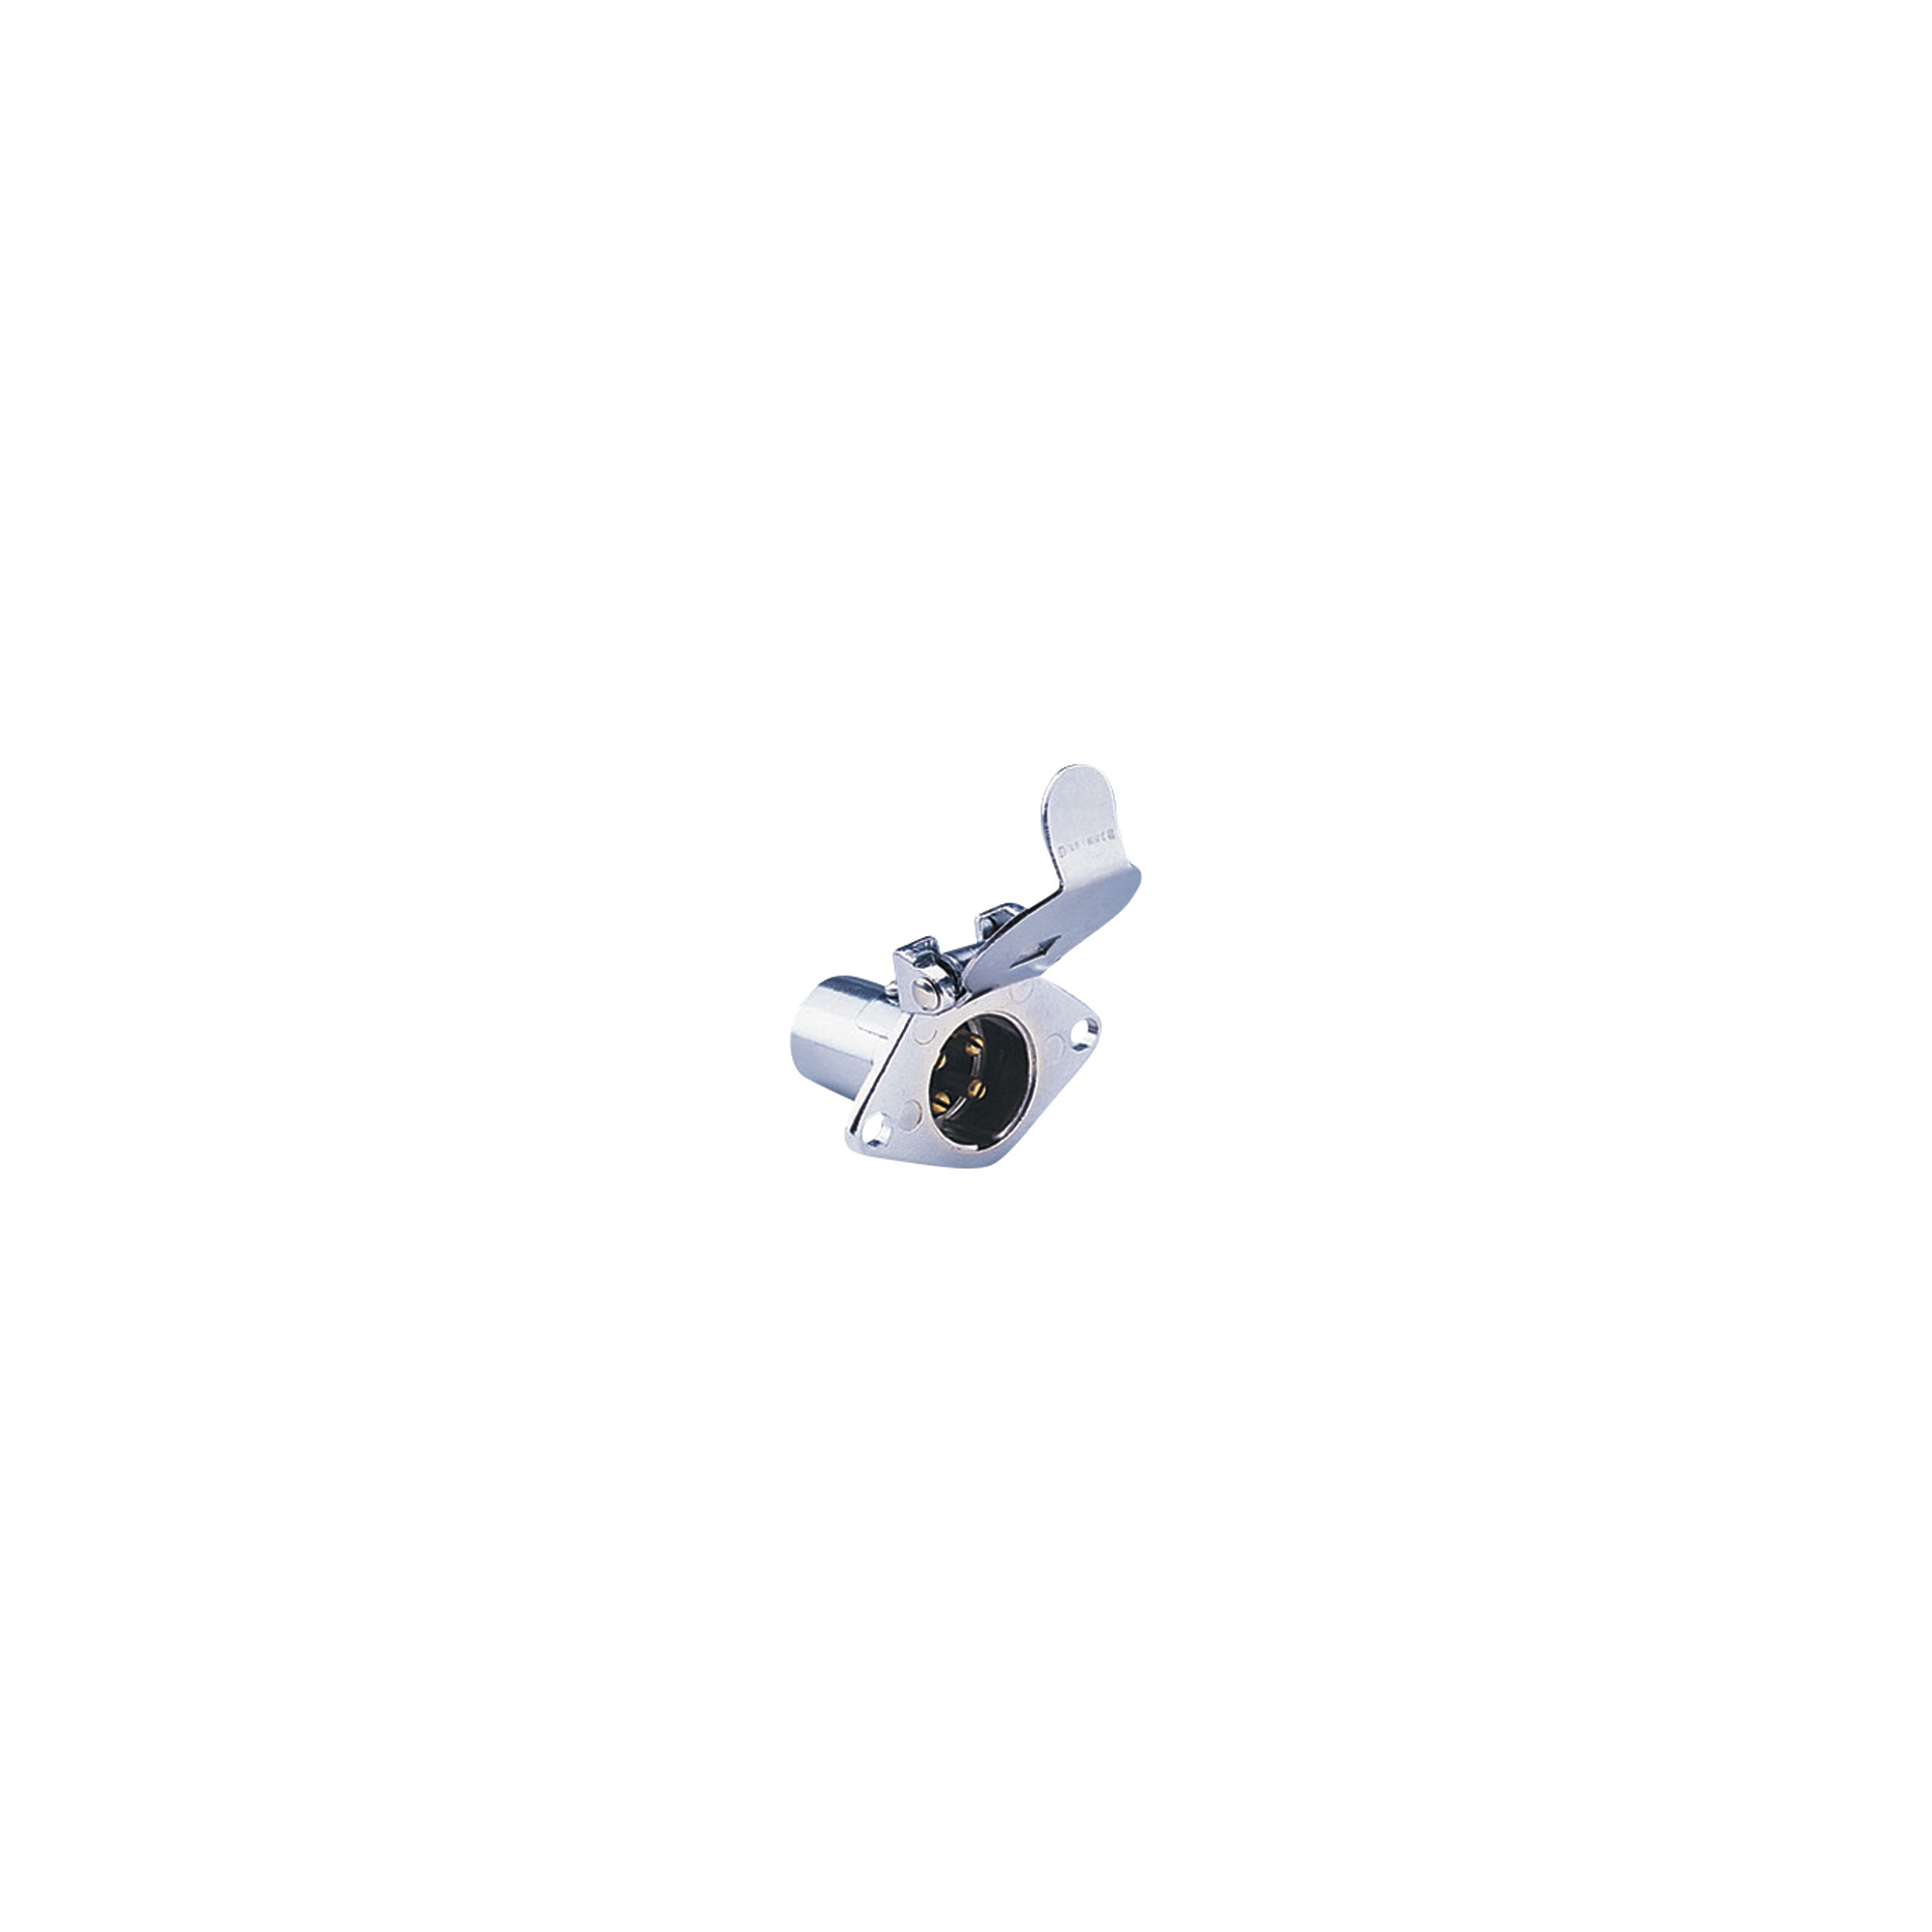 Hopkins Towing Solutions 4 Pole Round Trailer Wiring Connector â Vehicle Side, Model 48305